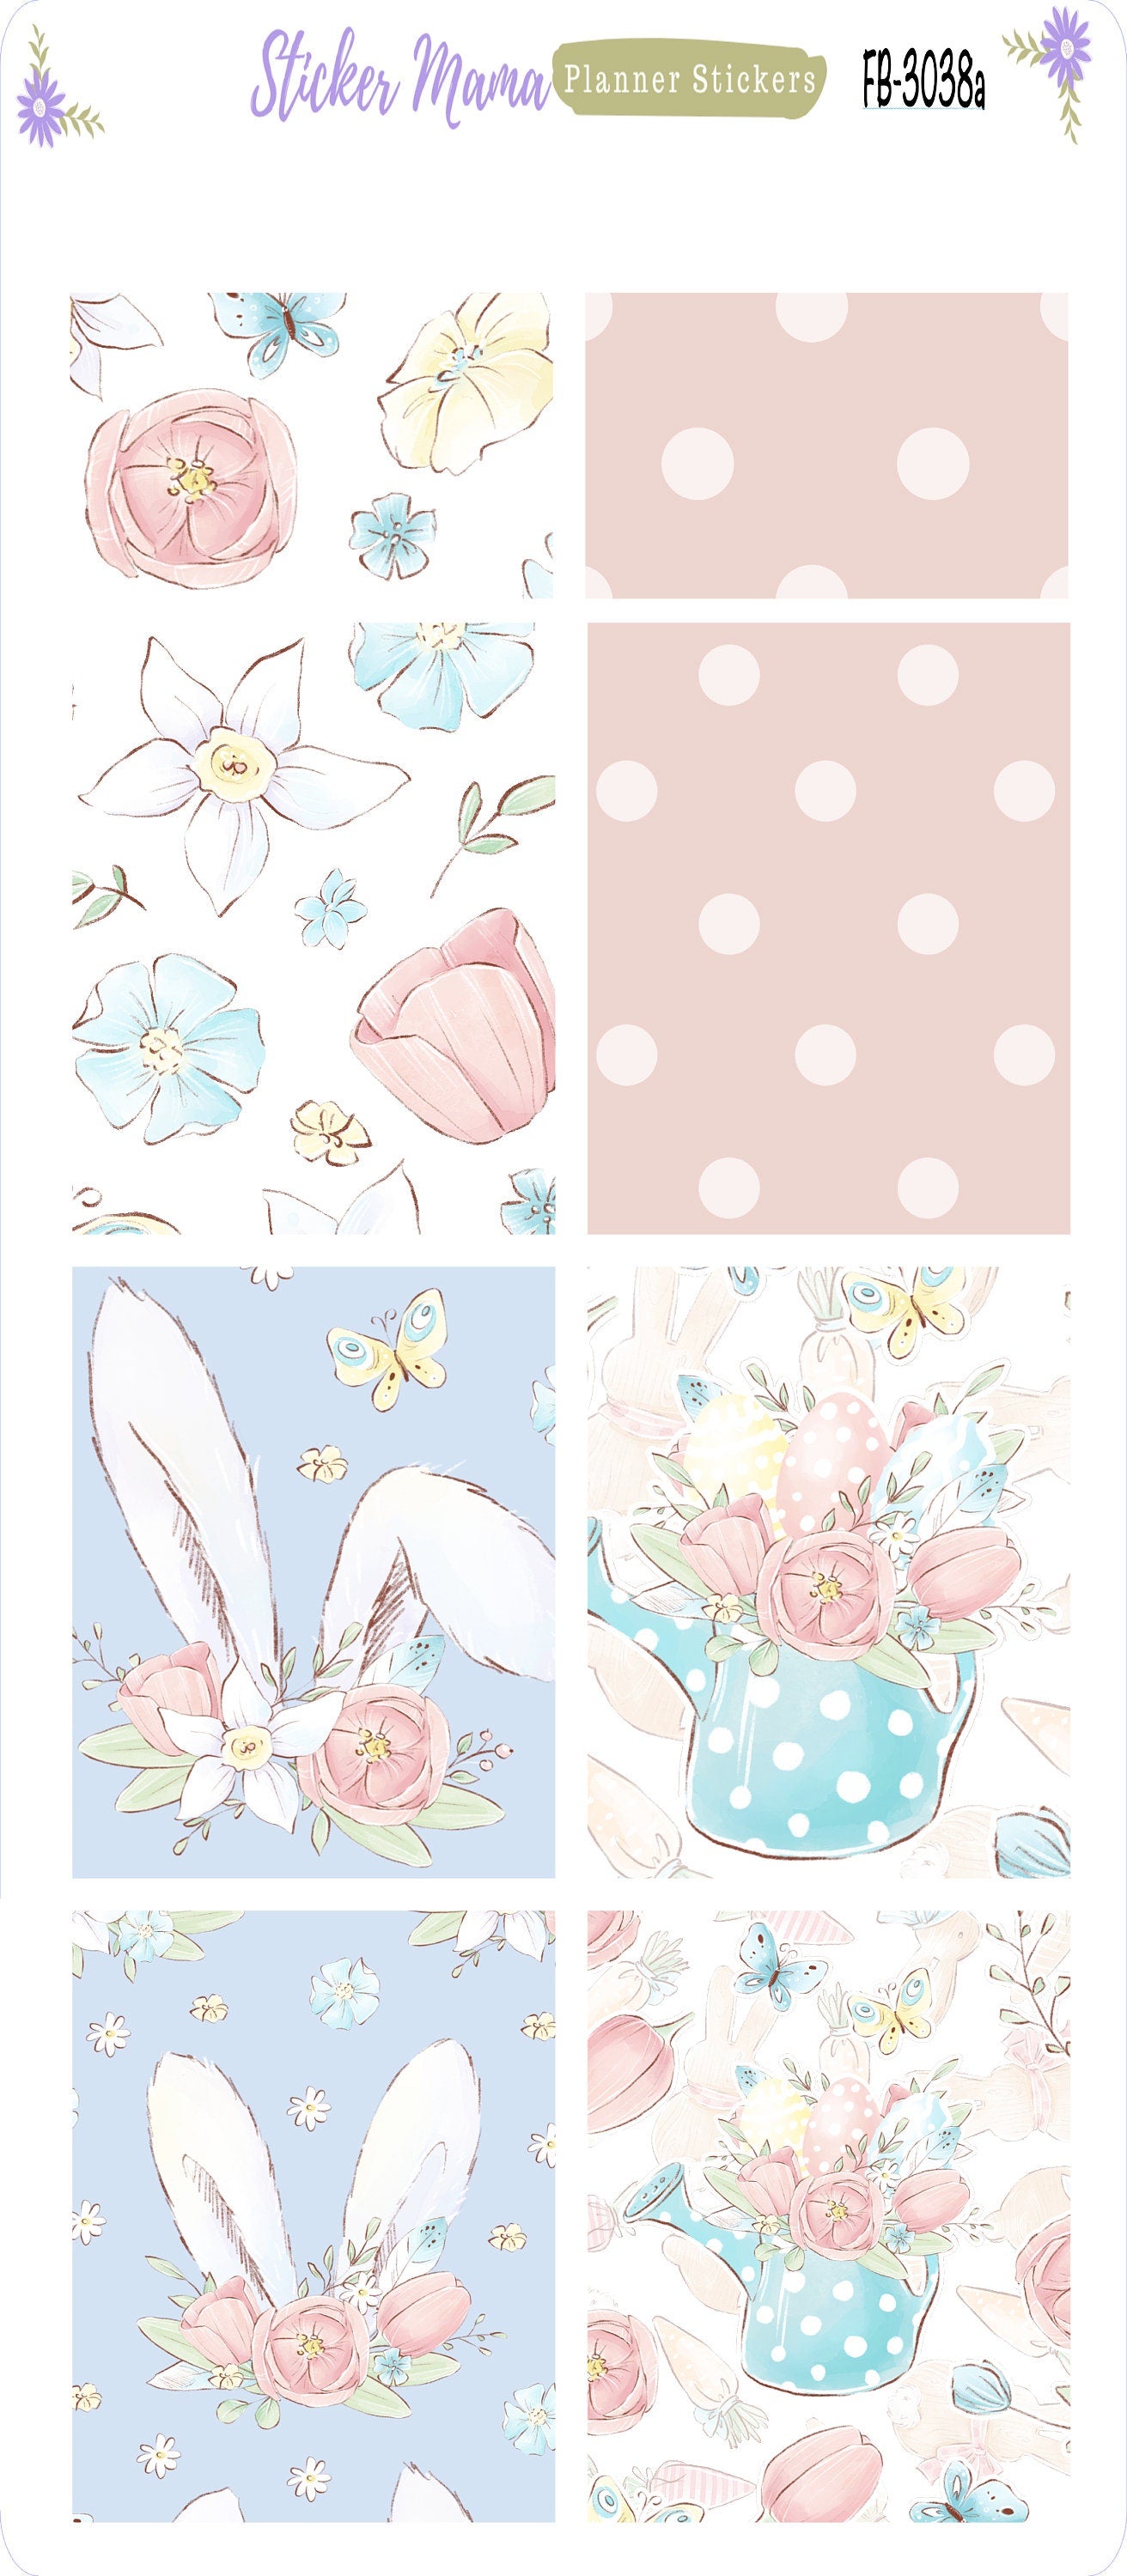 FB-3038 FULL BOX "Easter Spring Time" Stickers || Planner Stickers || Full Box for Planners || Easter Sticker Kit